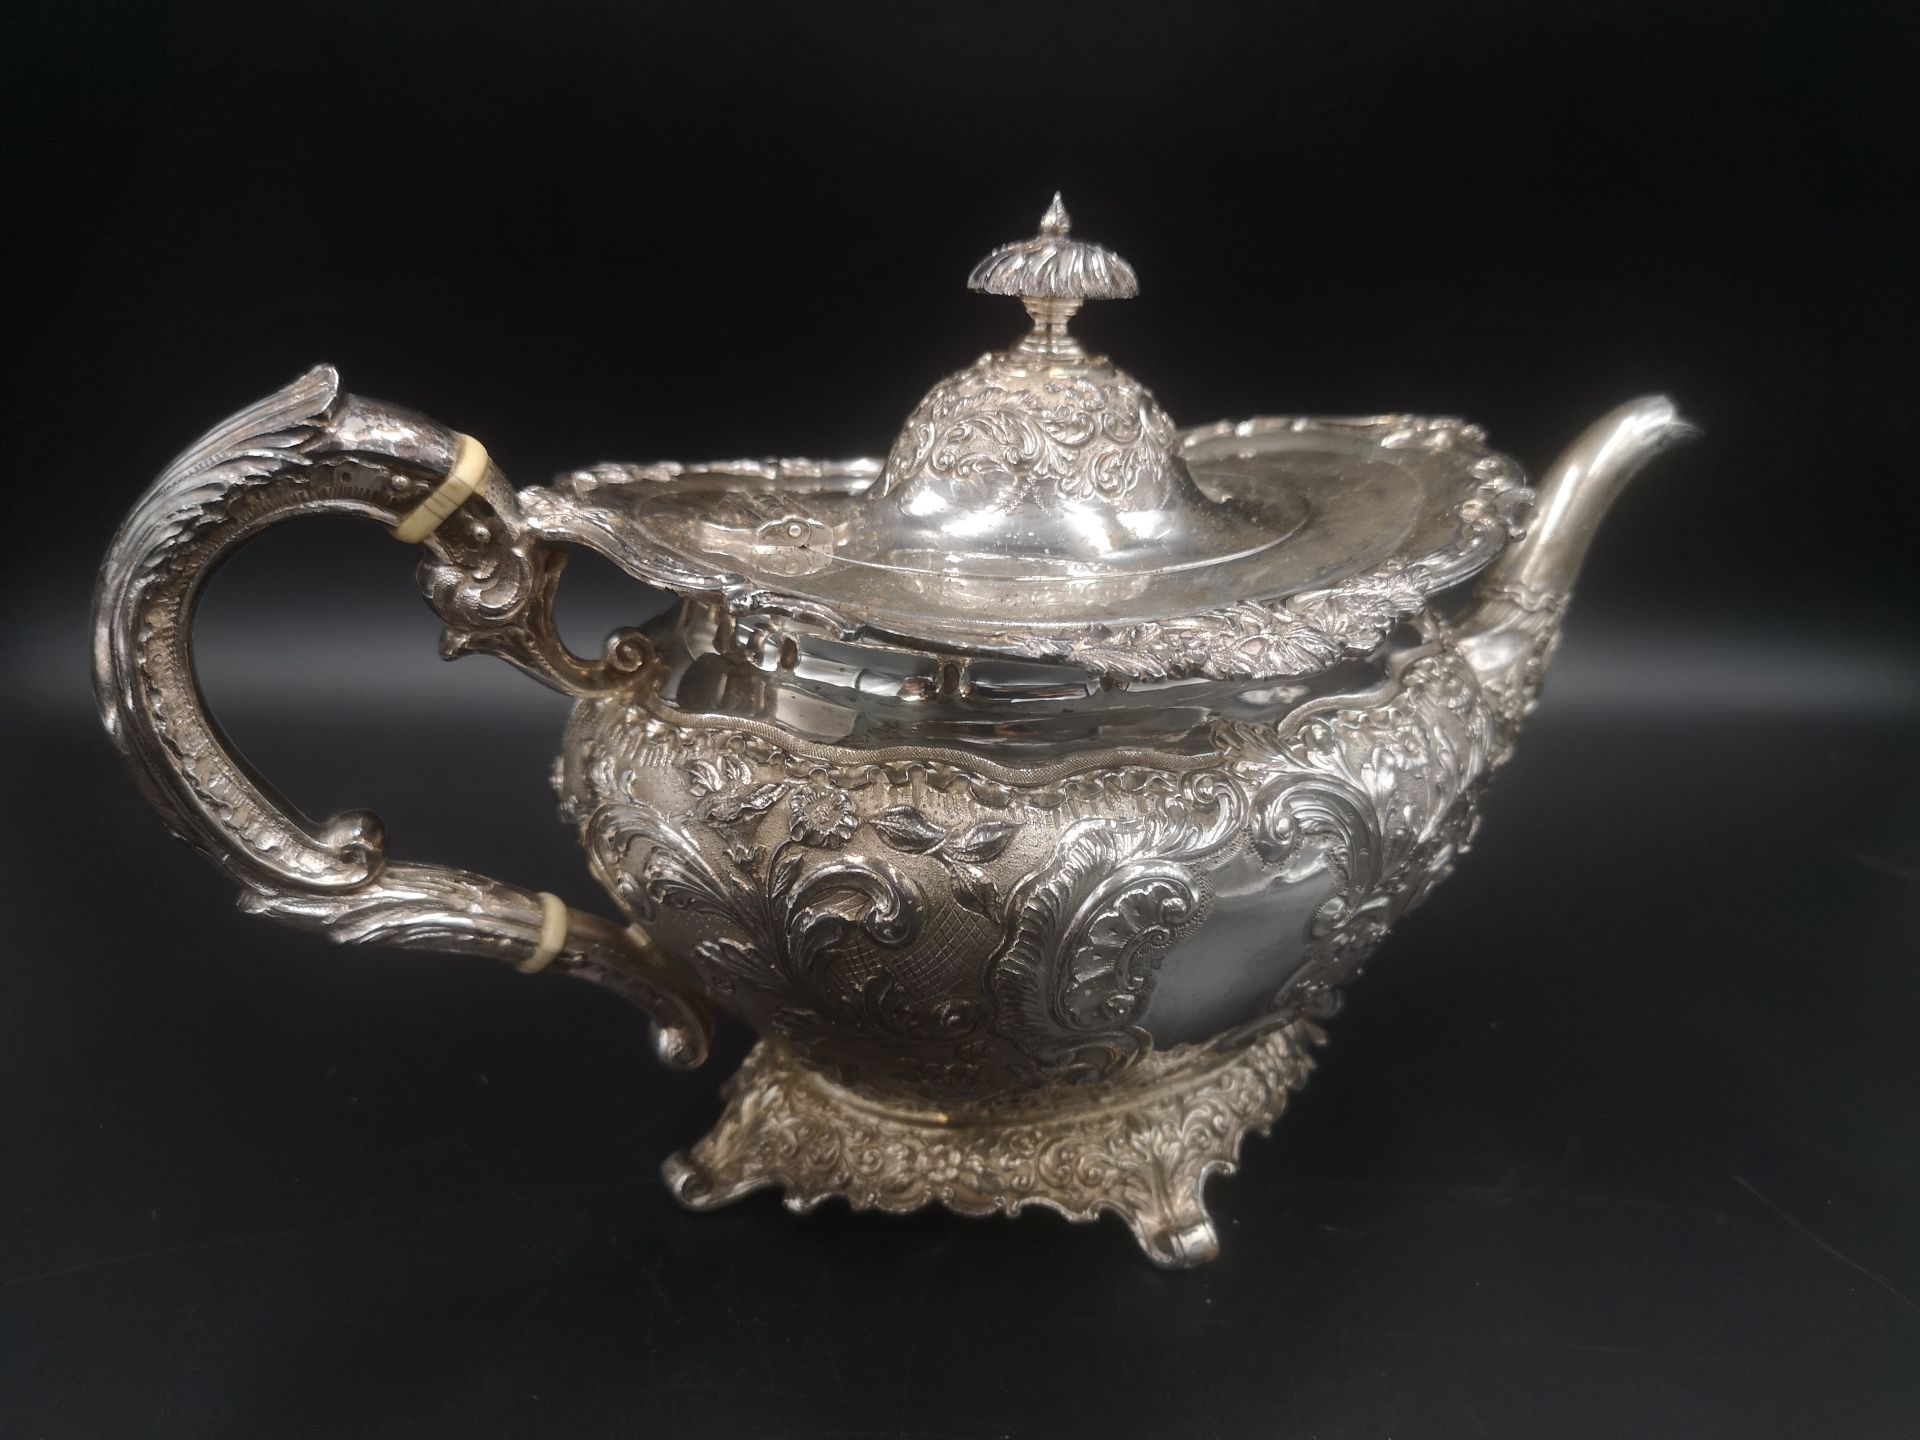 Silver teapot with repousse decoration - Image 2 of 4